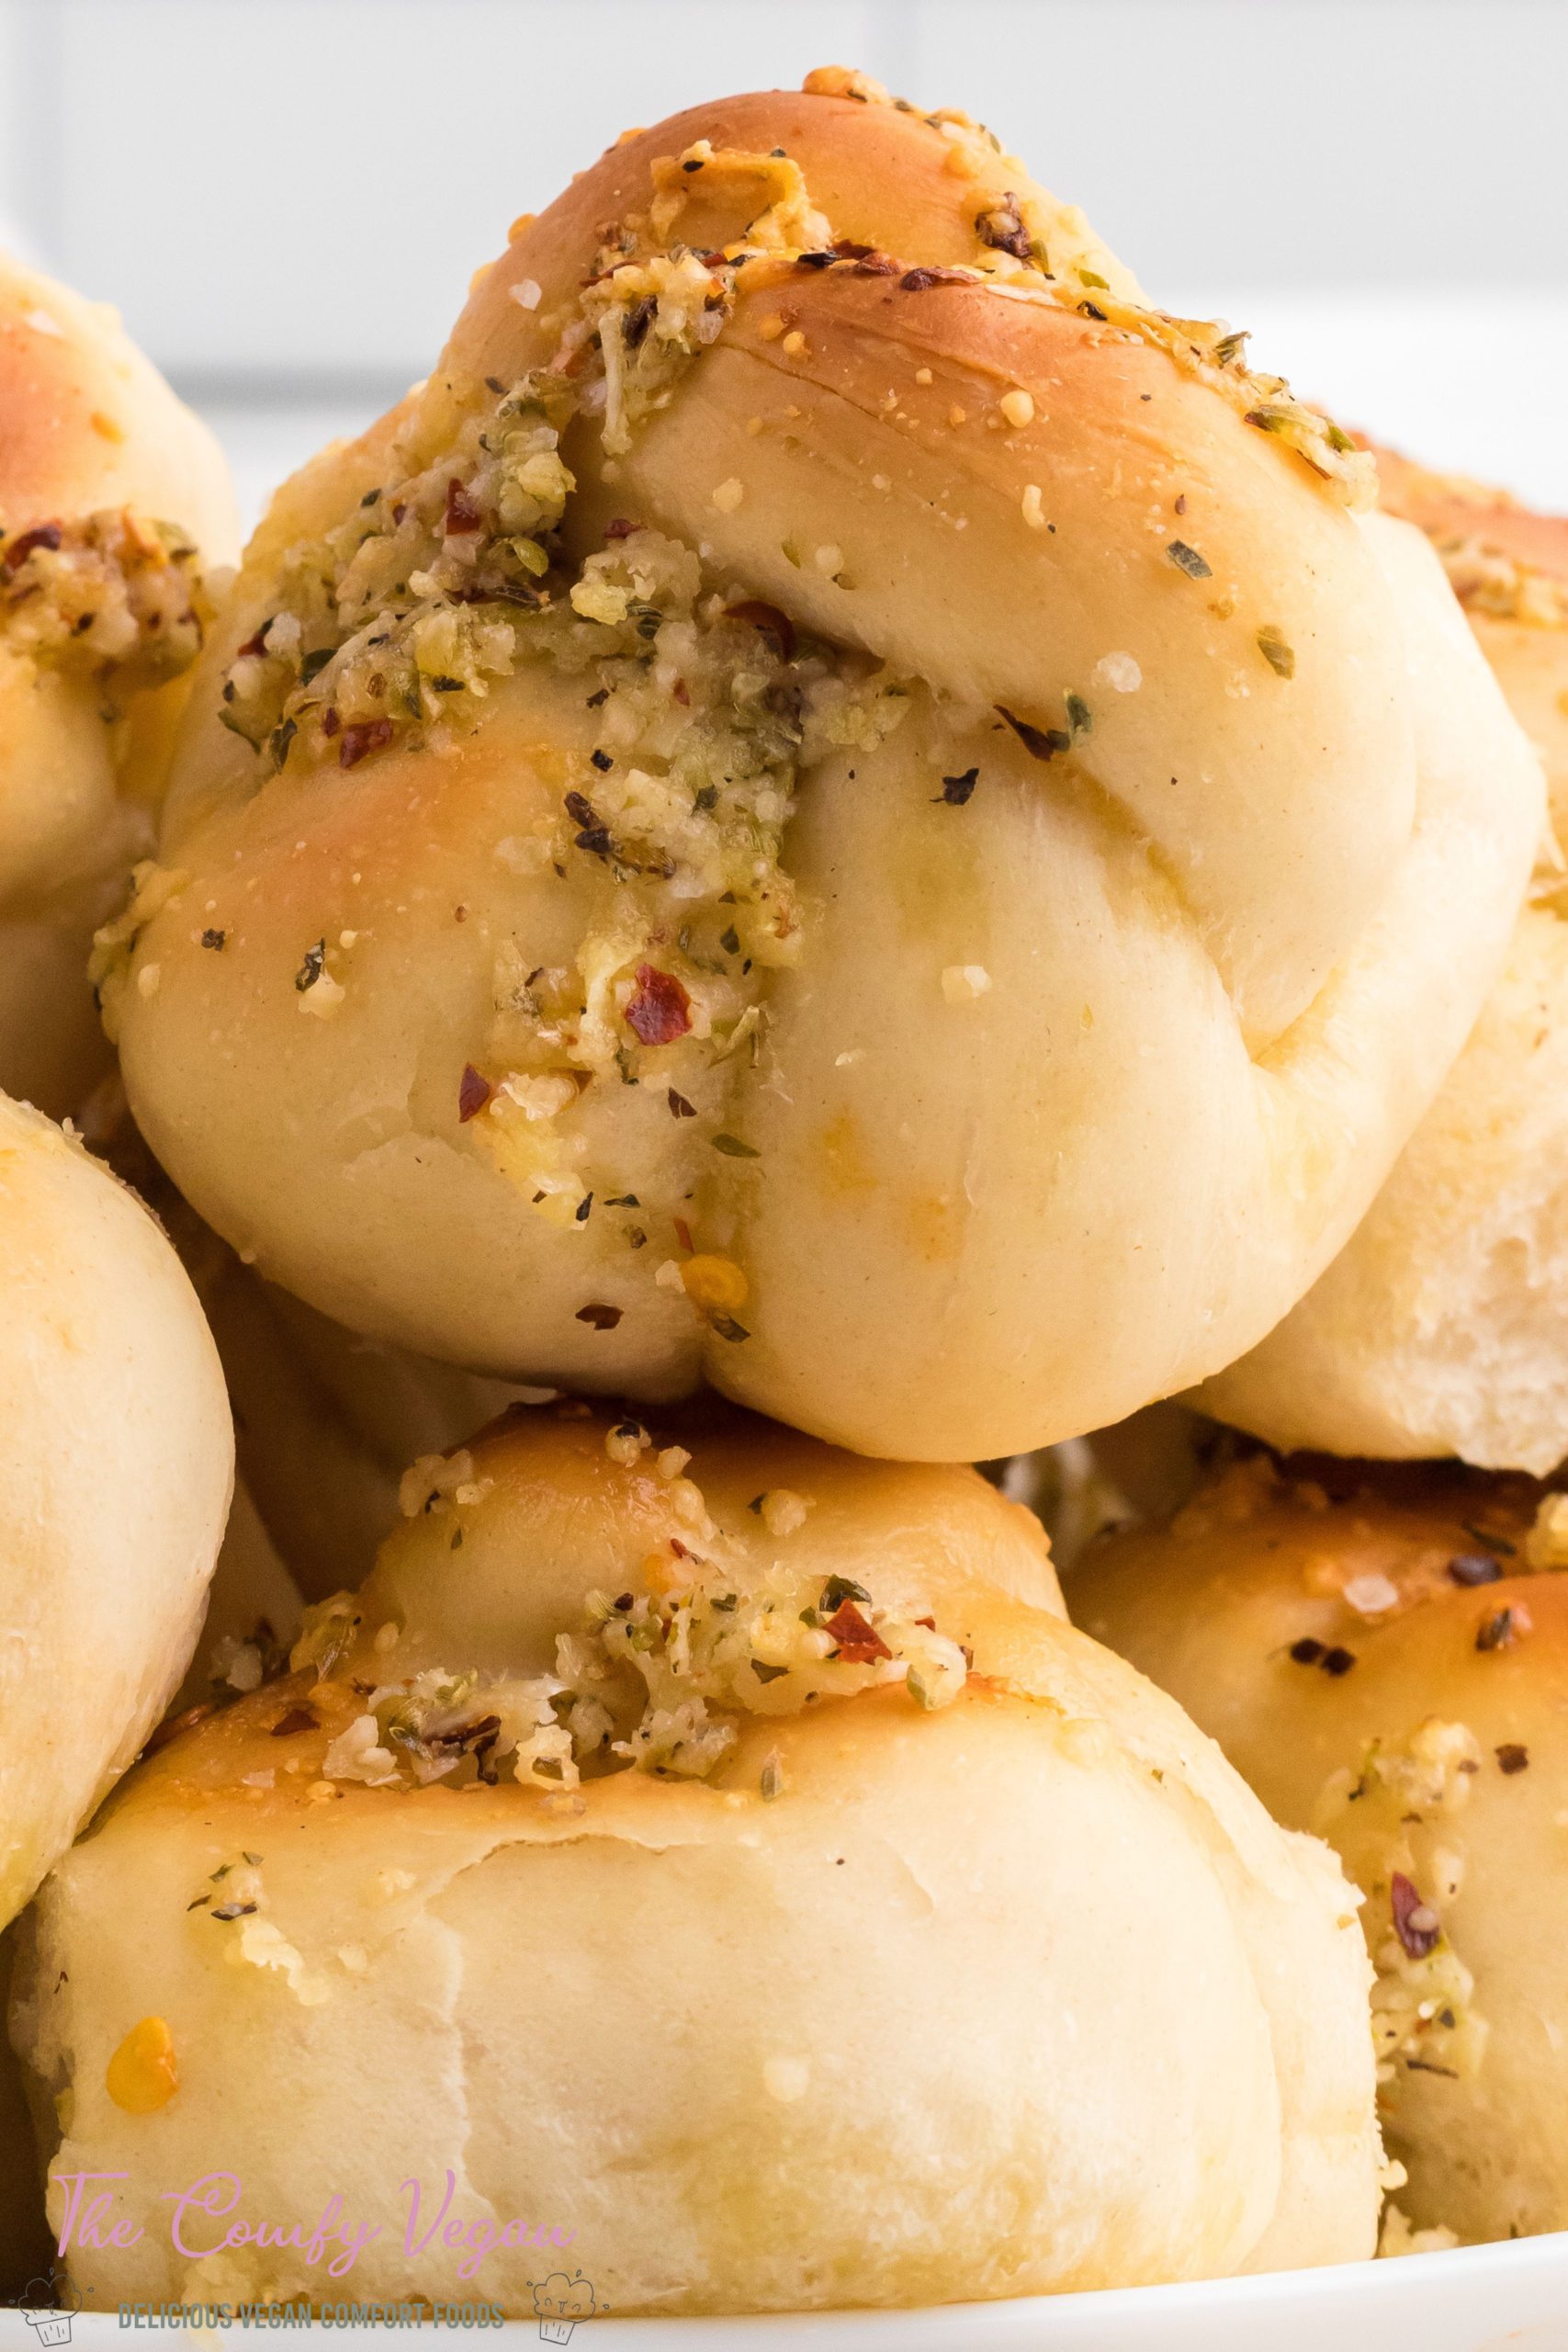 Make these delicious Vegan Garlic Knots using vegan homemade pizza dough or vegan refrigerated pizza dough. This recipe will remind you of the classic garlic knots you eat at your favorite Italian restaurant. This version is 100% vegan and just as delicious!